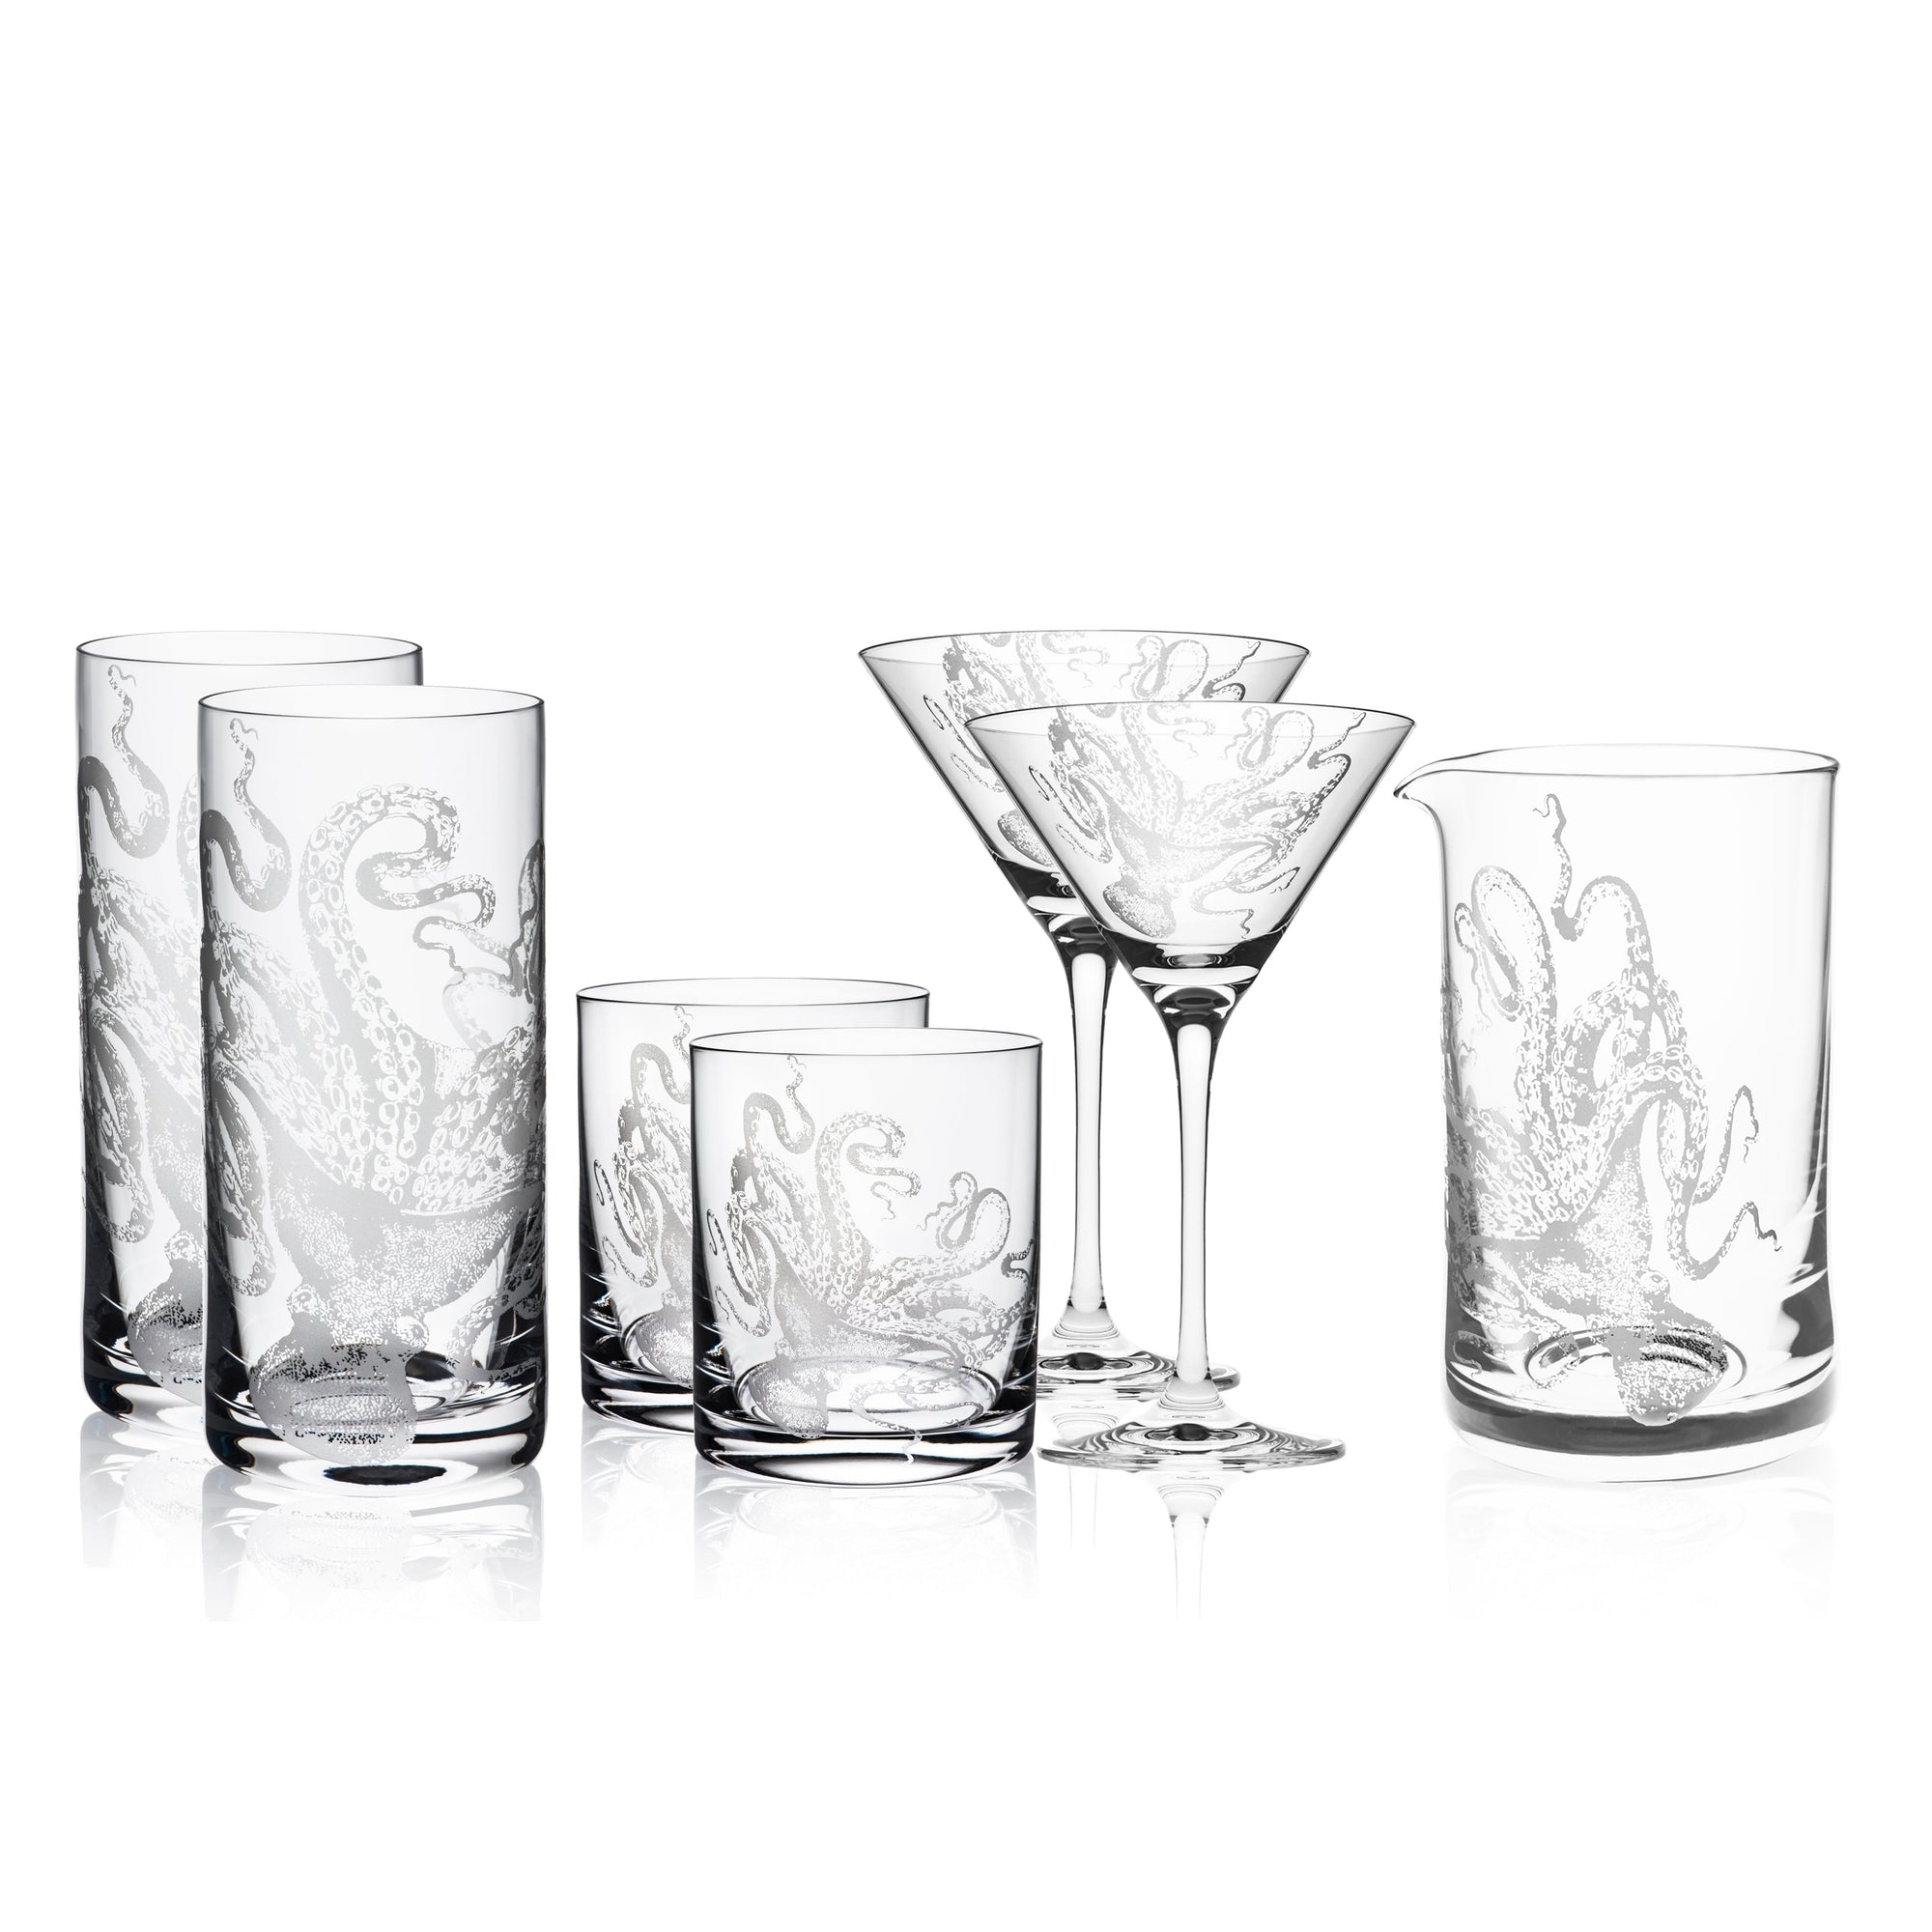 A handcrafted set of I Love Lucy Cocktail Collection glasses with a design featuring Lucy the octopus by Caskata Artisanal Home.